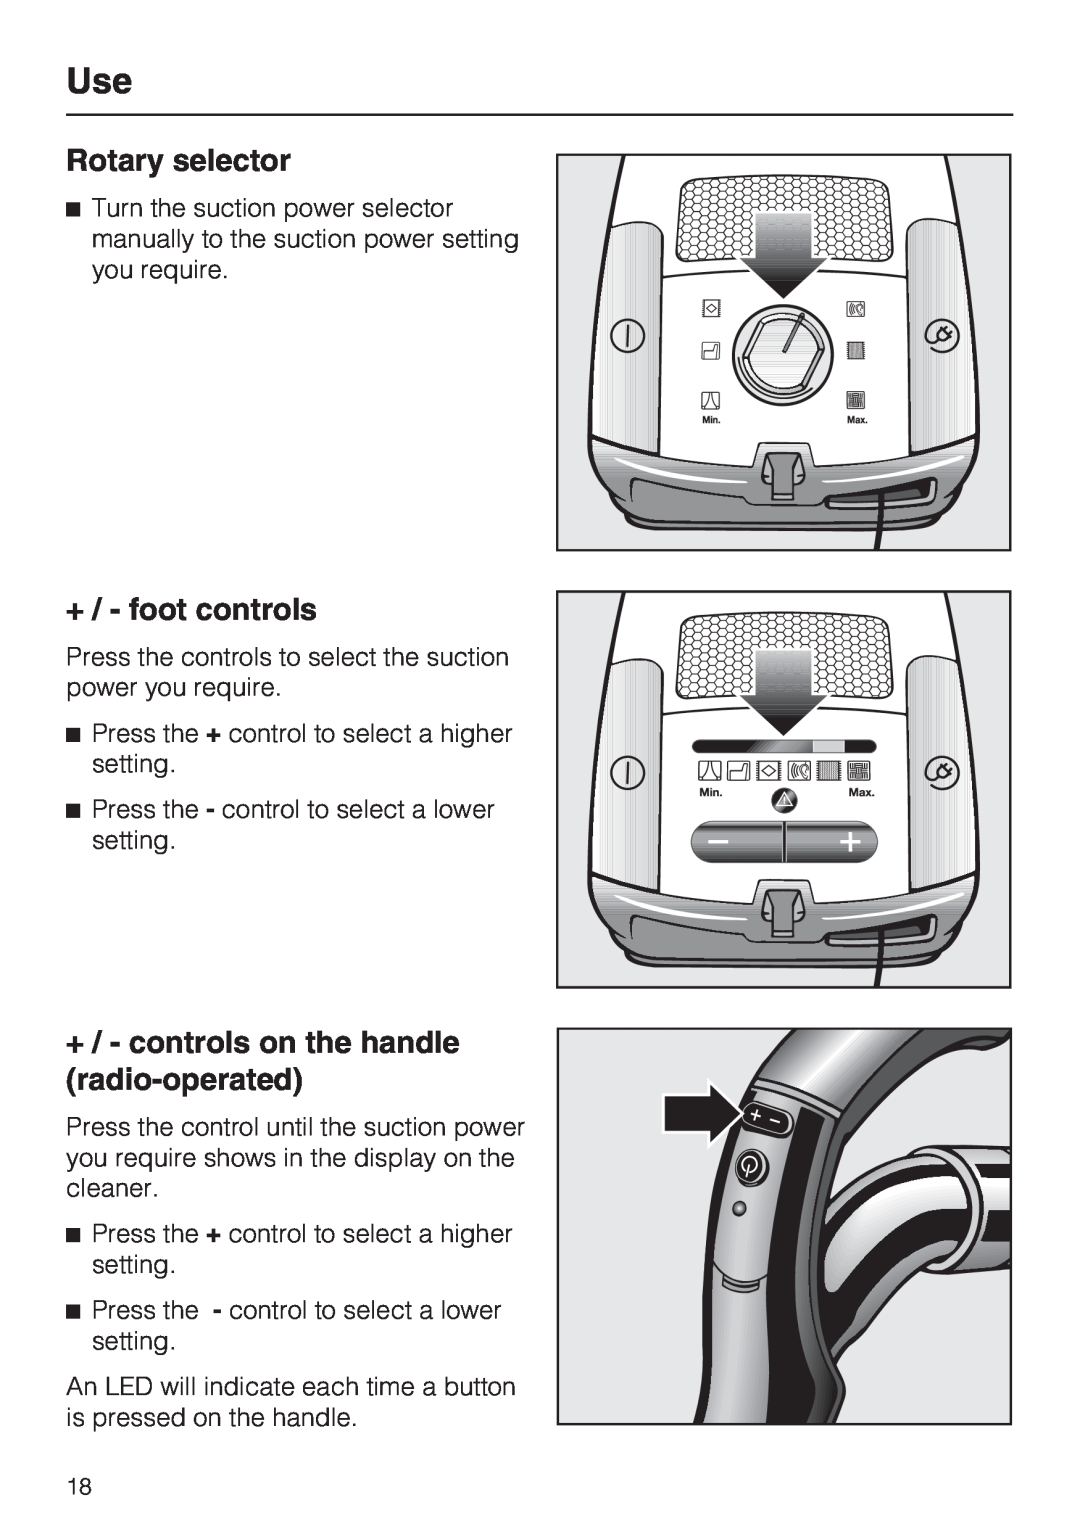 Miele S 4000 Series manual Rotary selector, + / - foot controls, +/ - controls on the handle radio-operated 